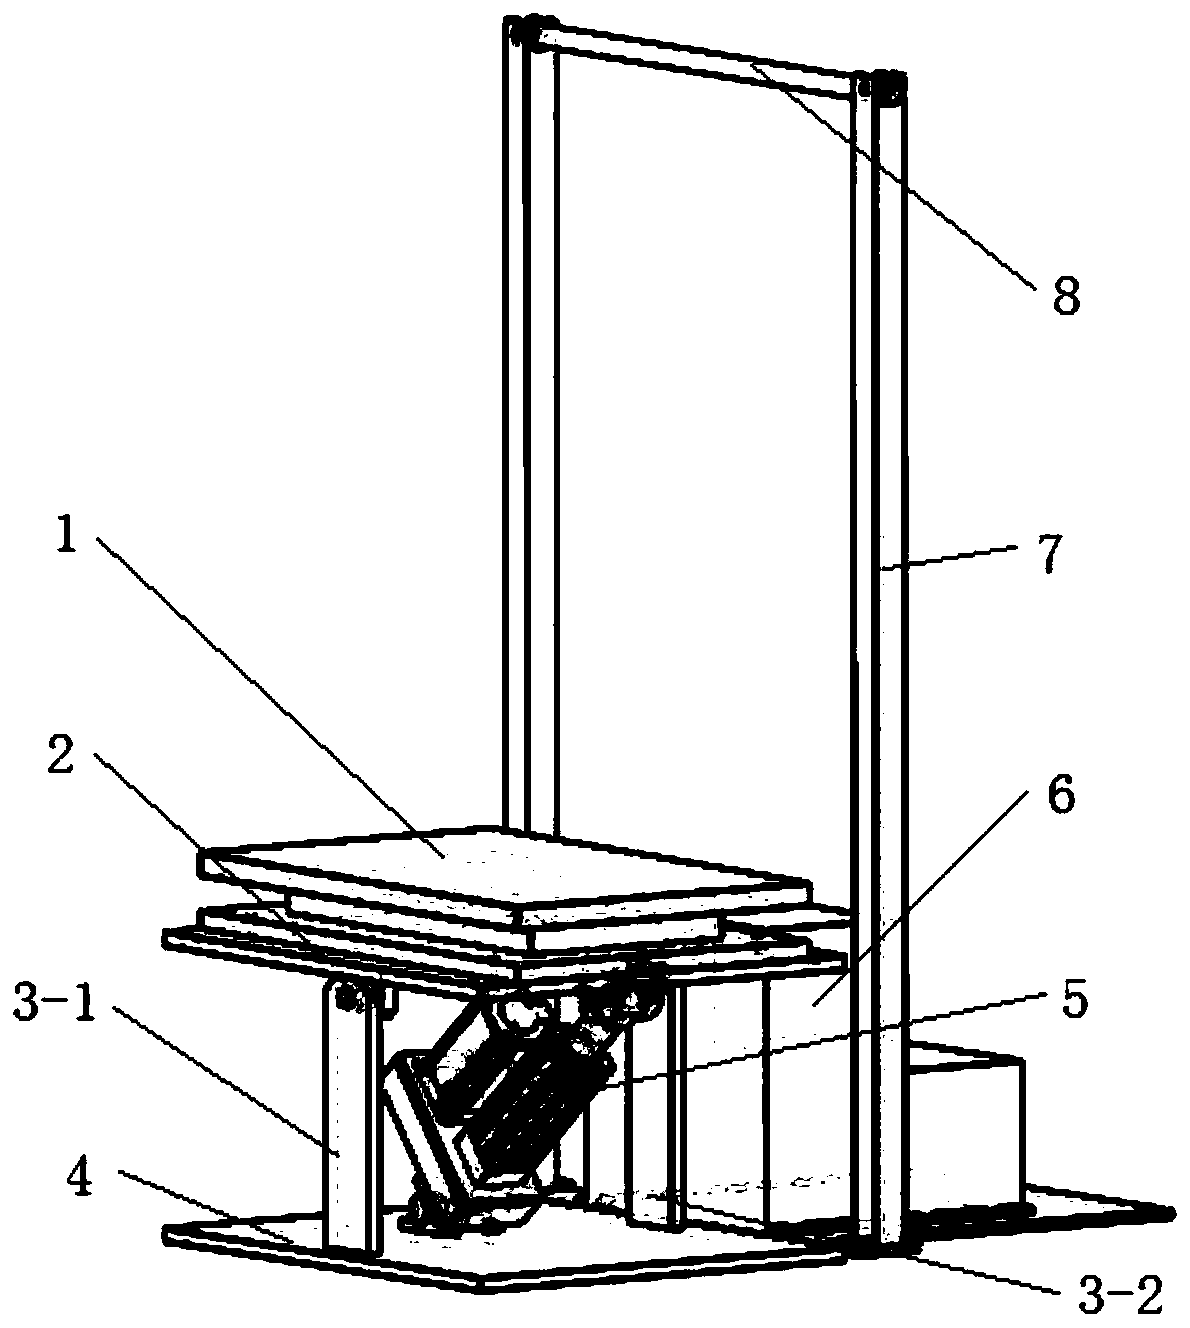 A medical swing platform and its control system